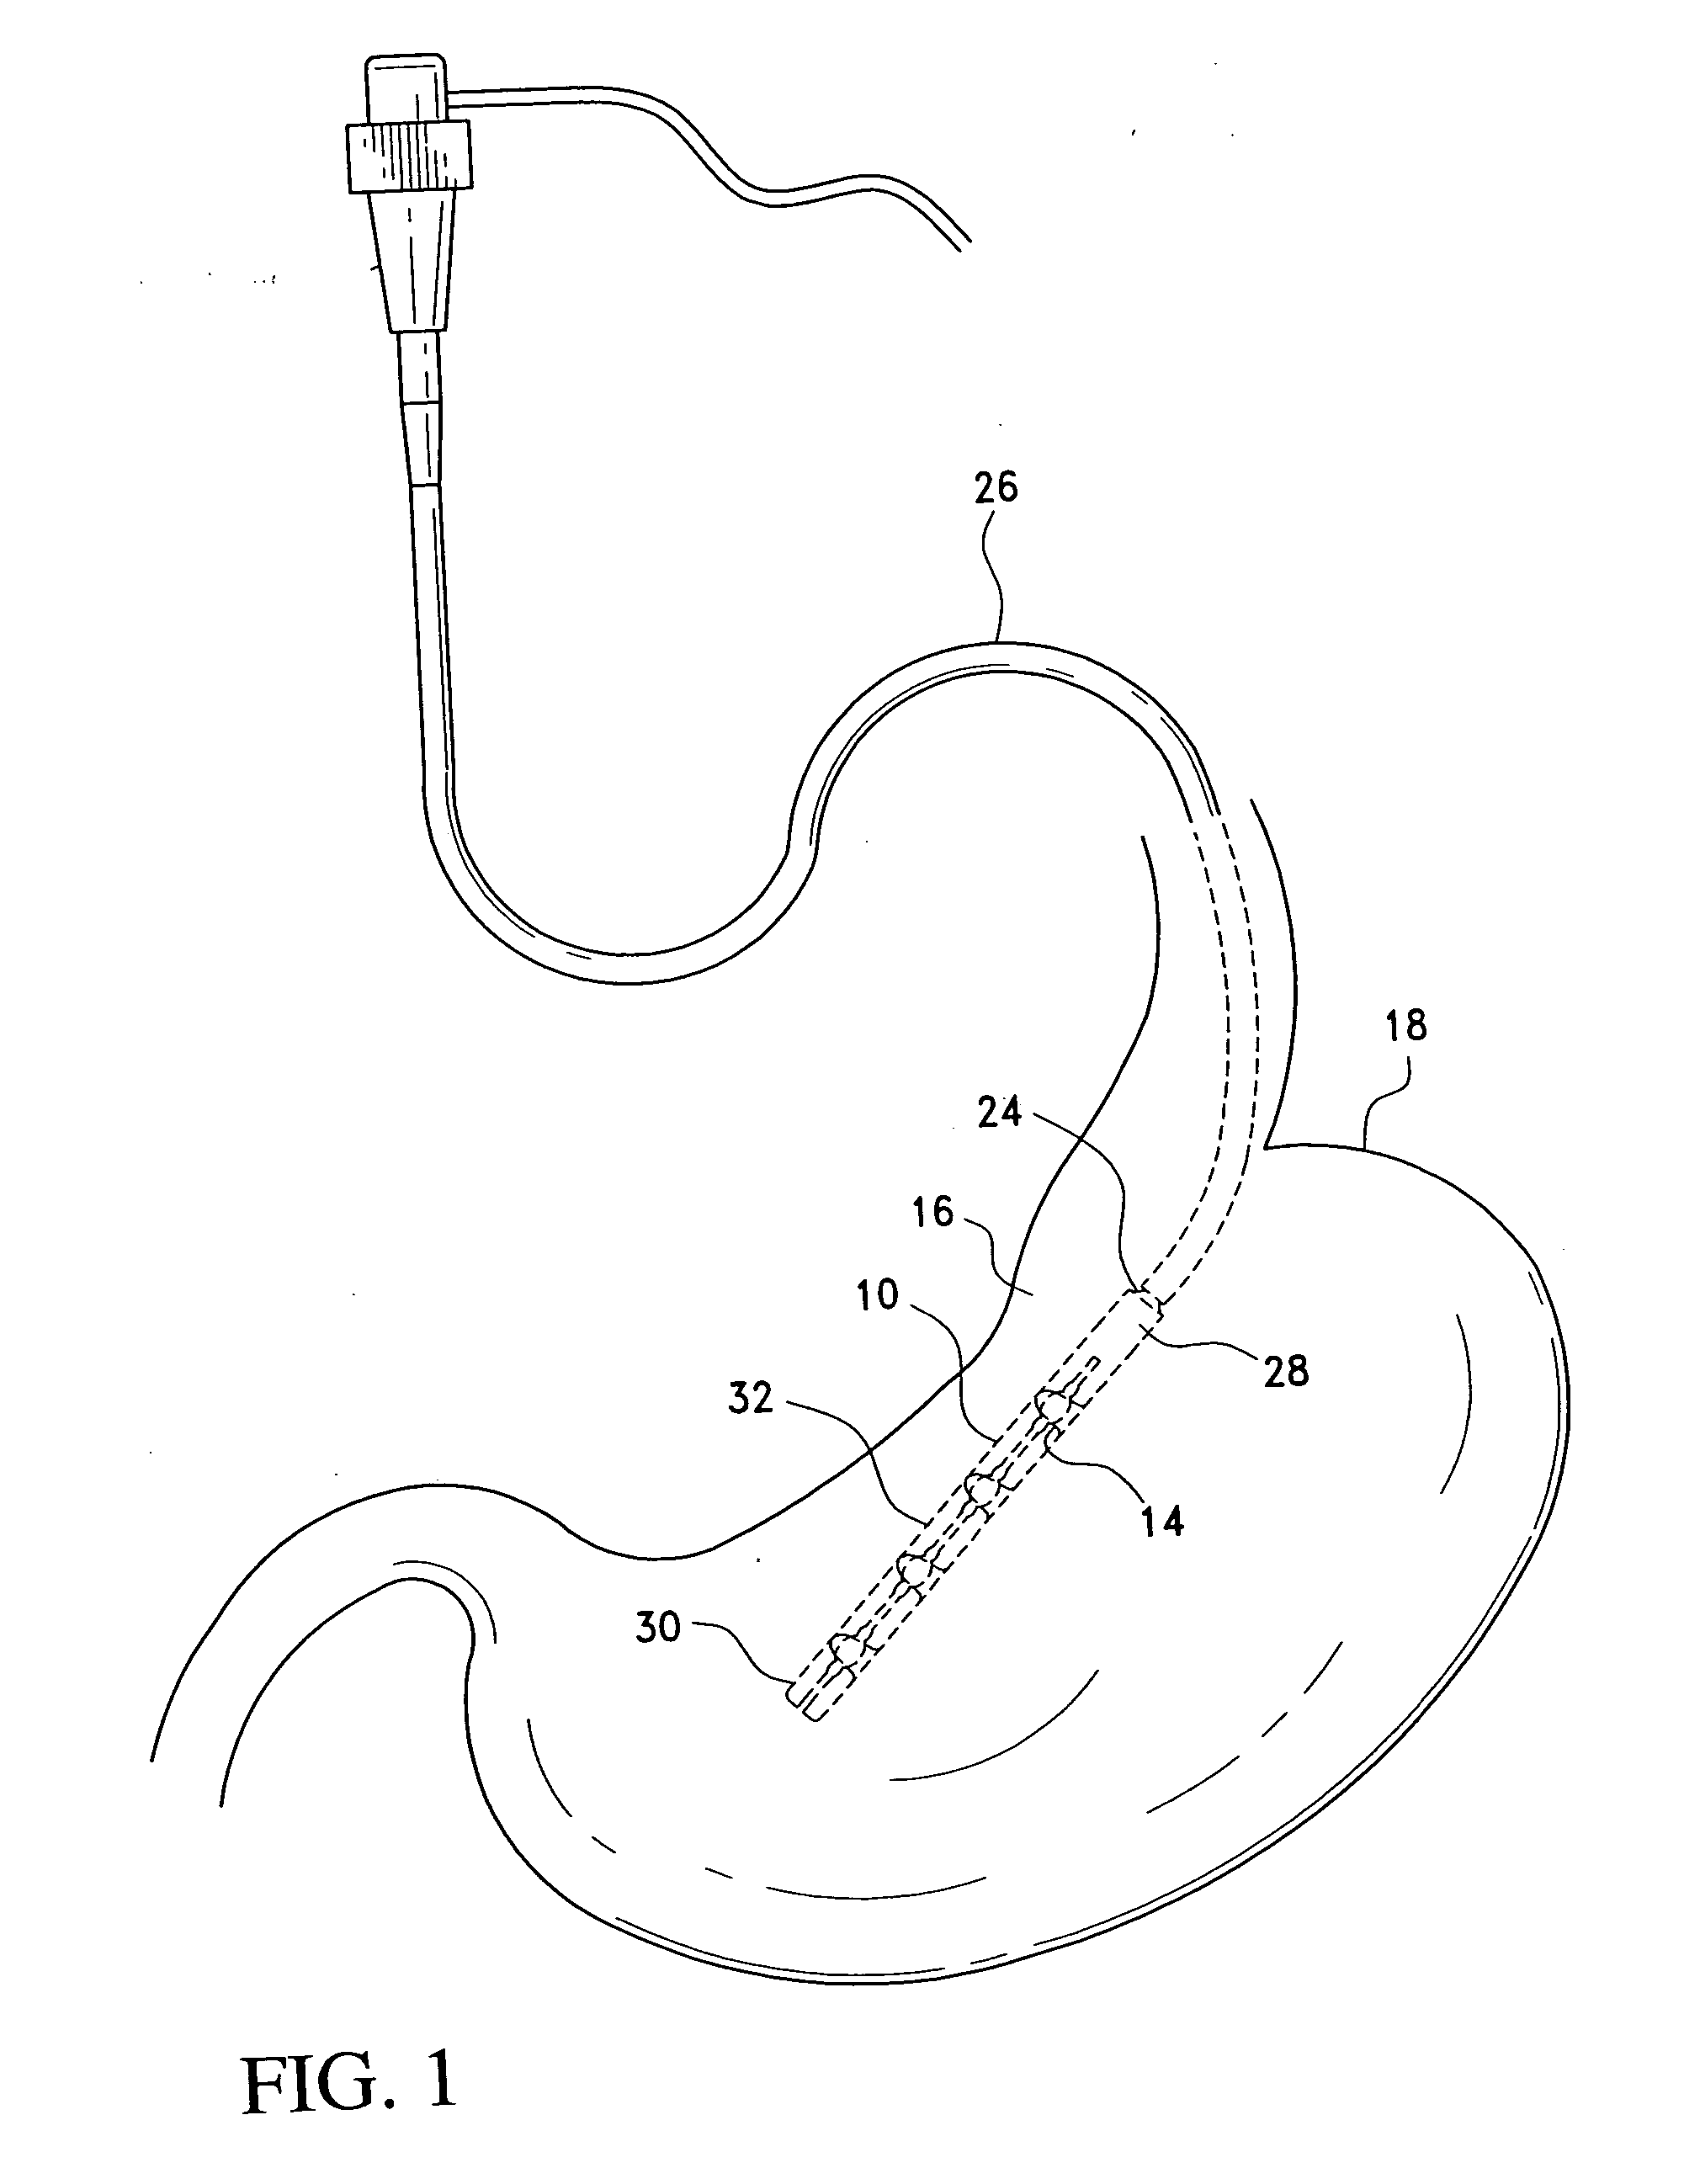 Apparatus for single pass gastric restriction